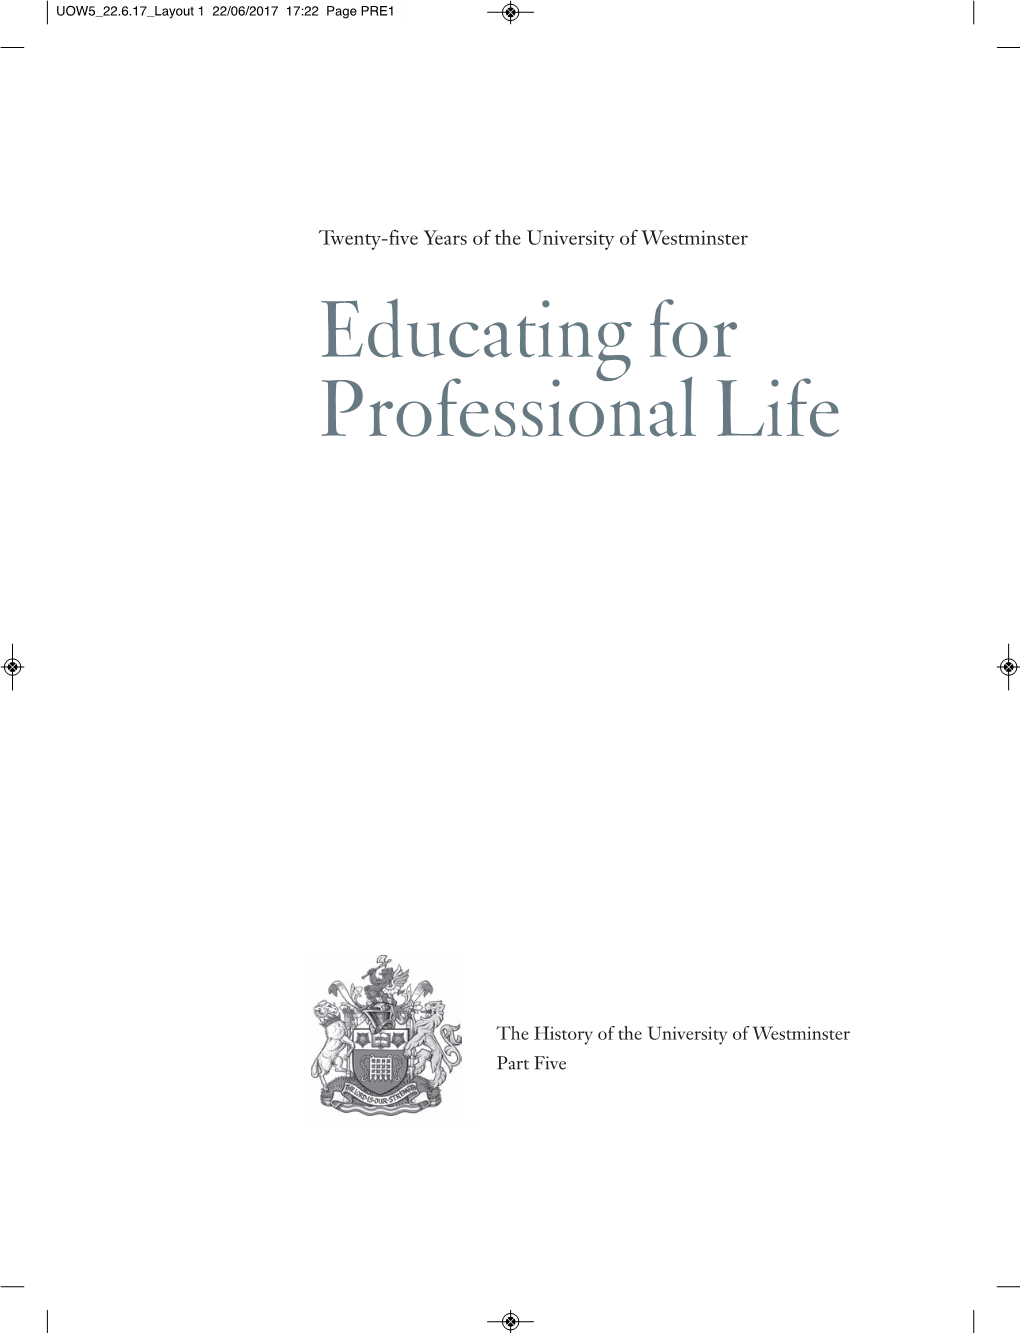 Educating for Professional Life